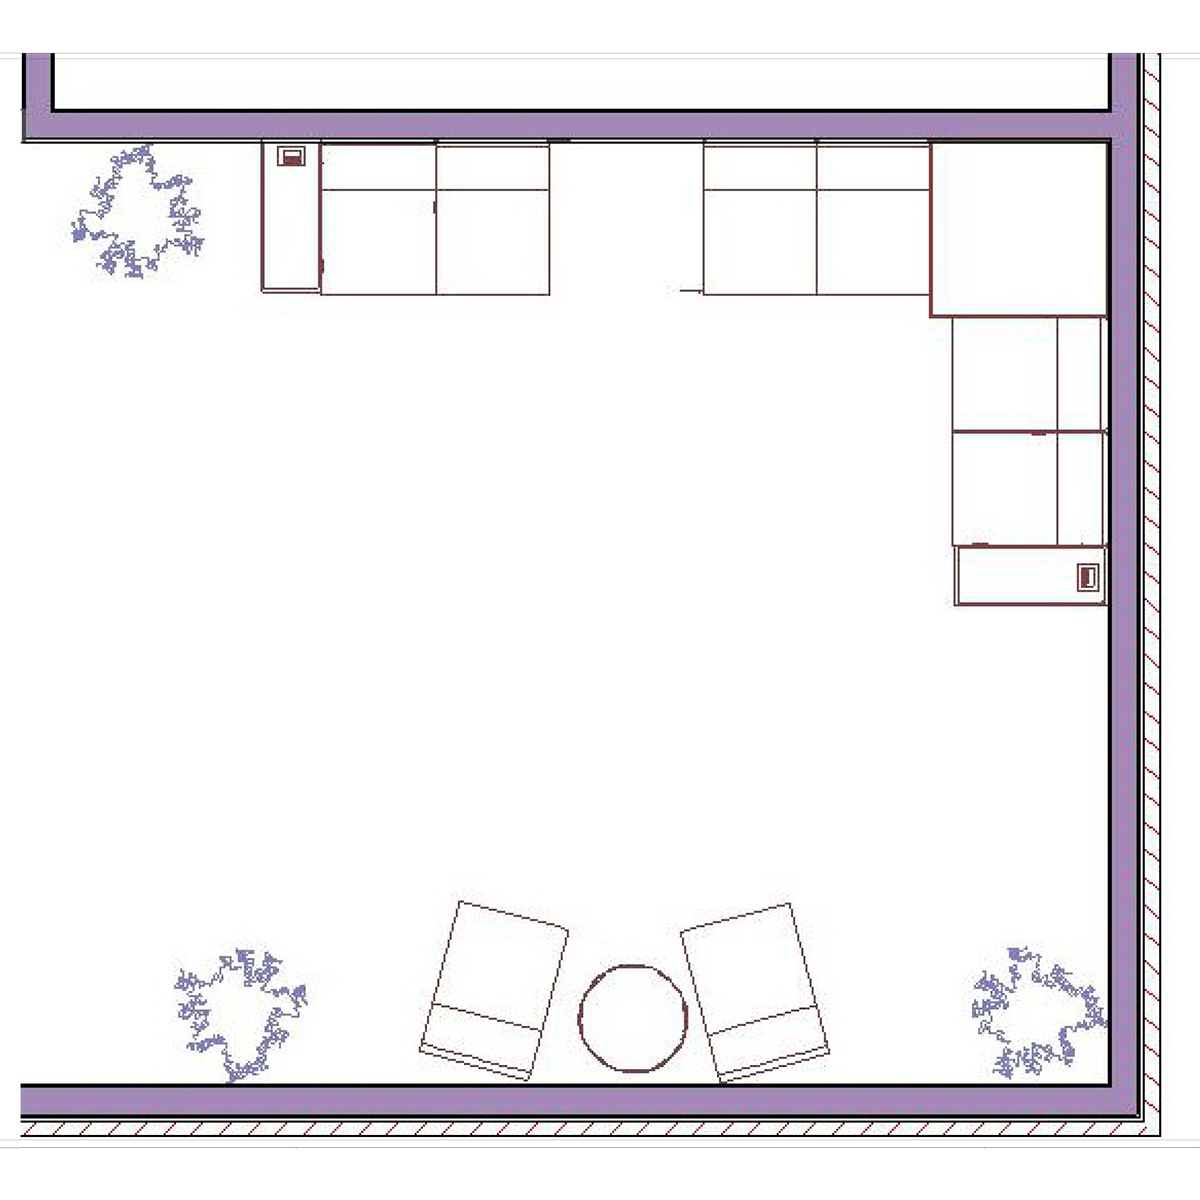 CAD Layout of McCook Evangelical Free Church